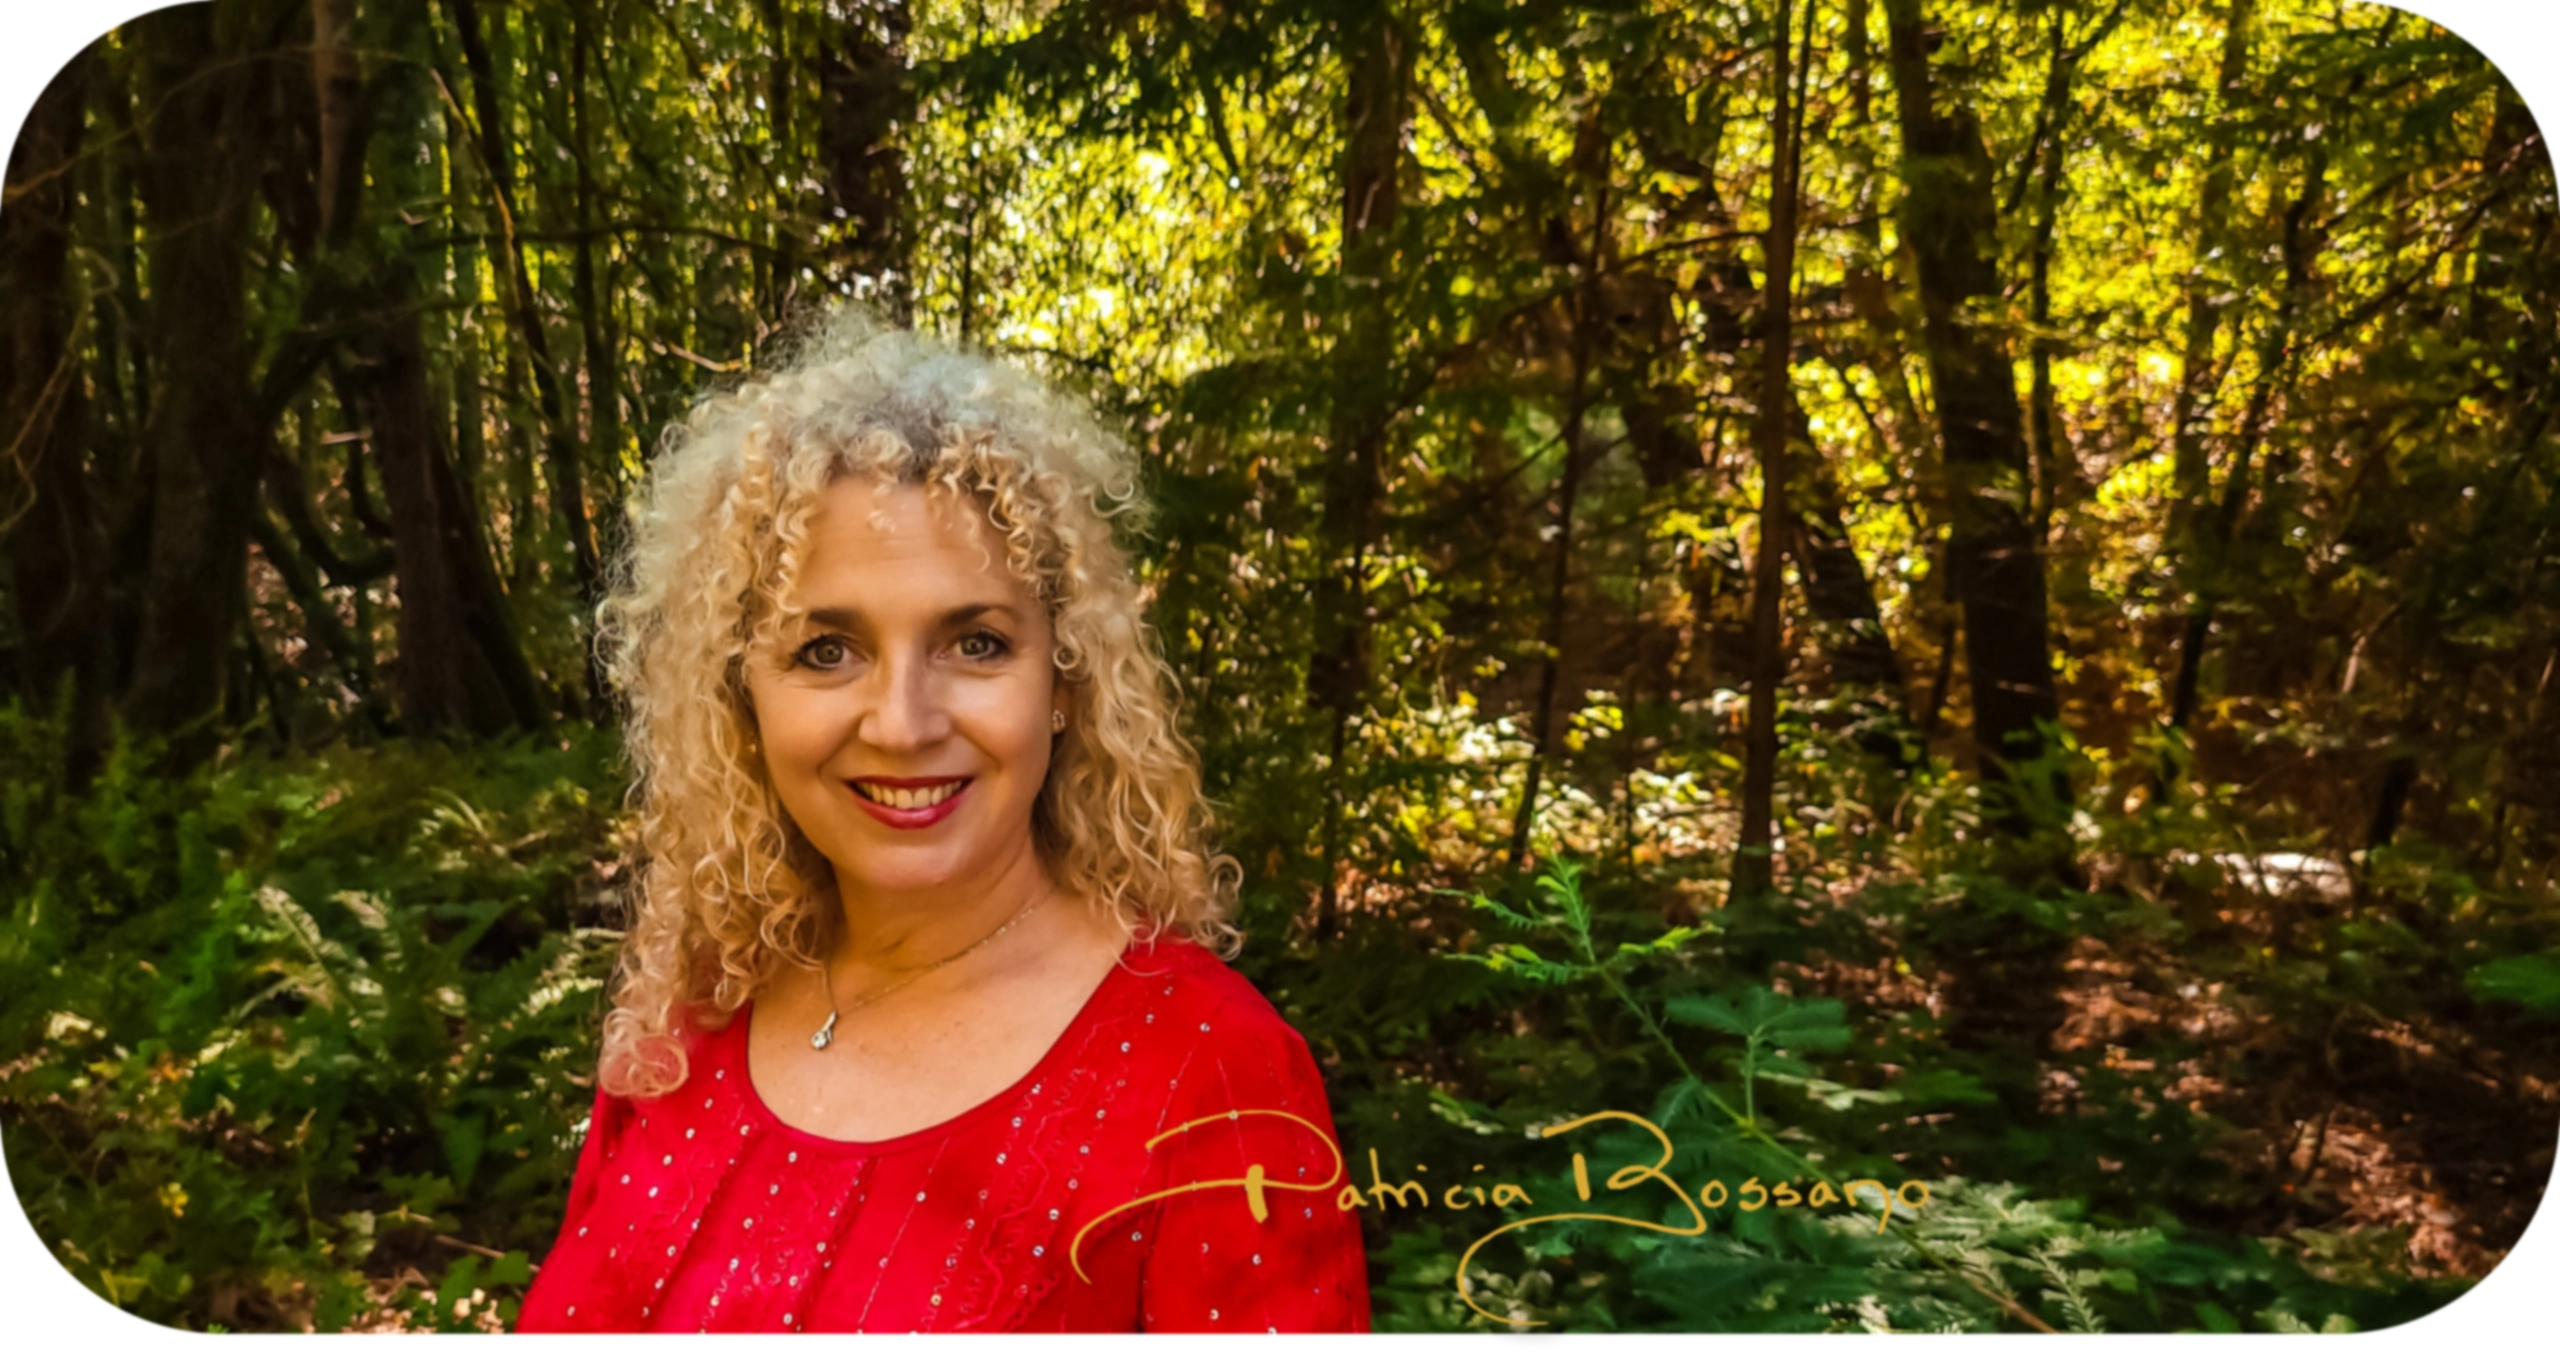 Patricia Bossano, author, forest background